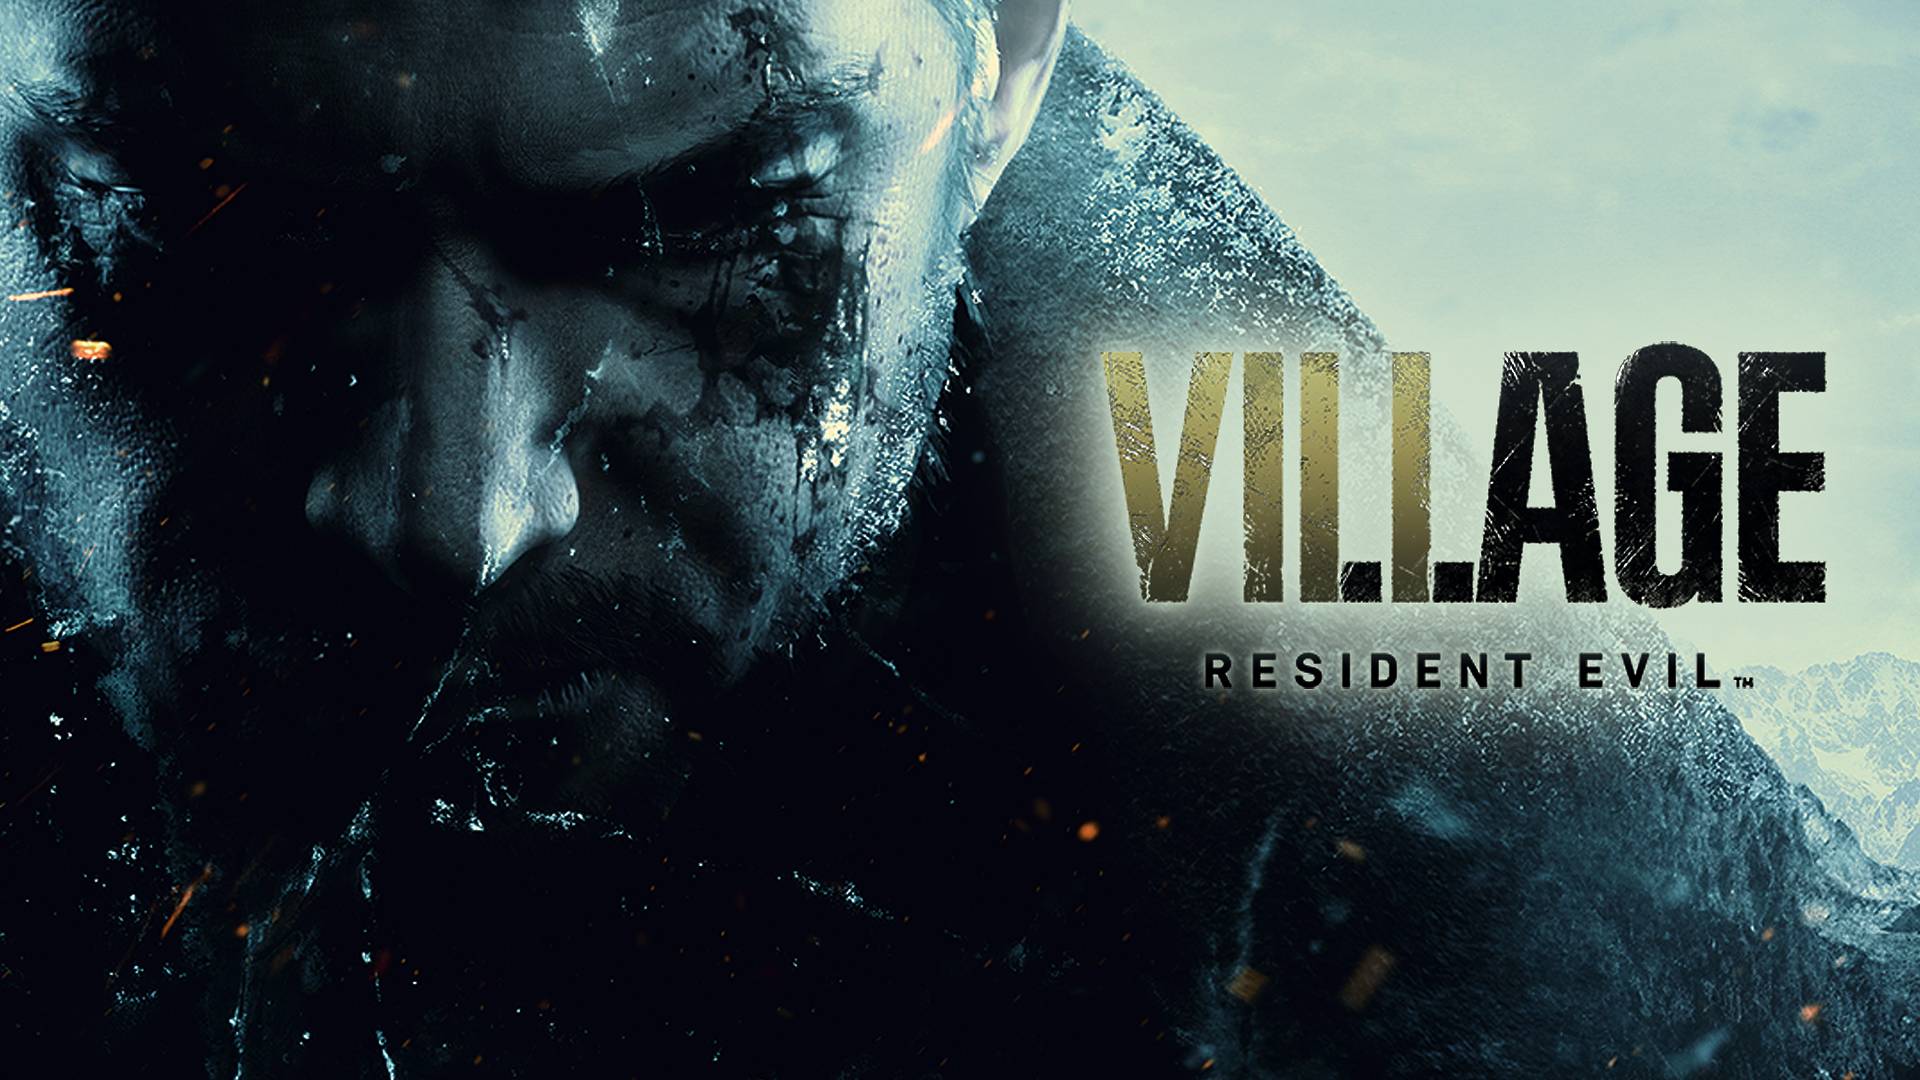 Retailer Lists Resident Evil Village For PlayStation 4 And Xbox One Alongside Next-Gen Versions